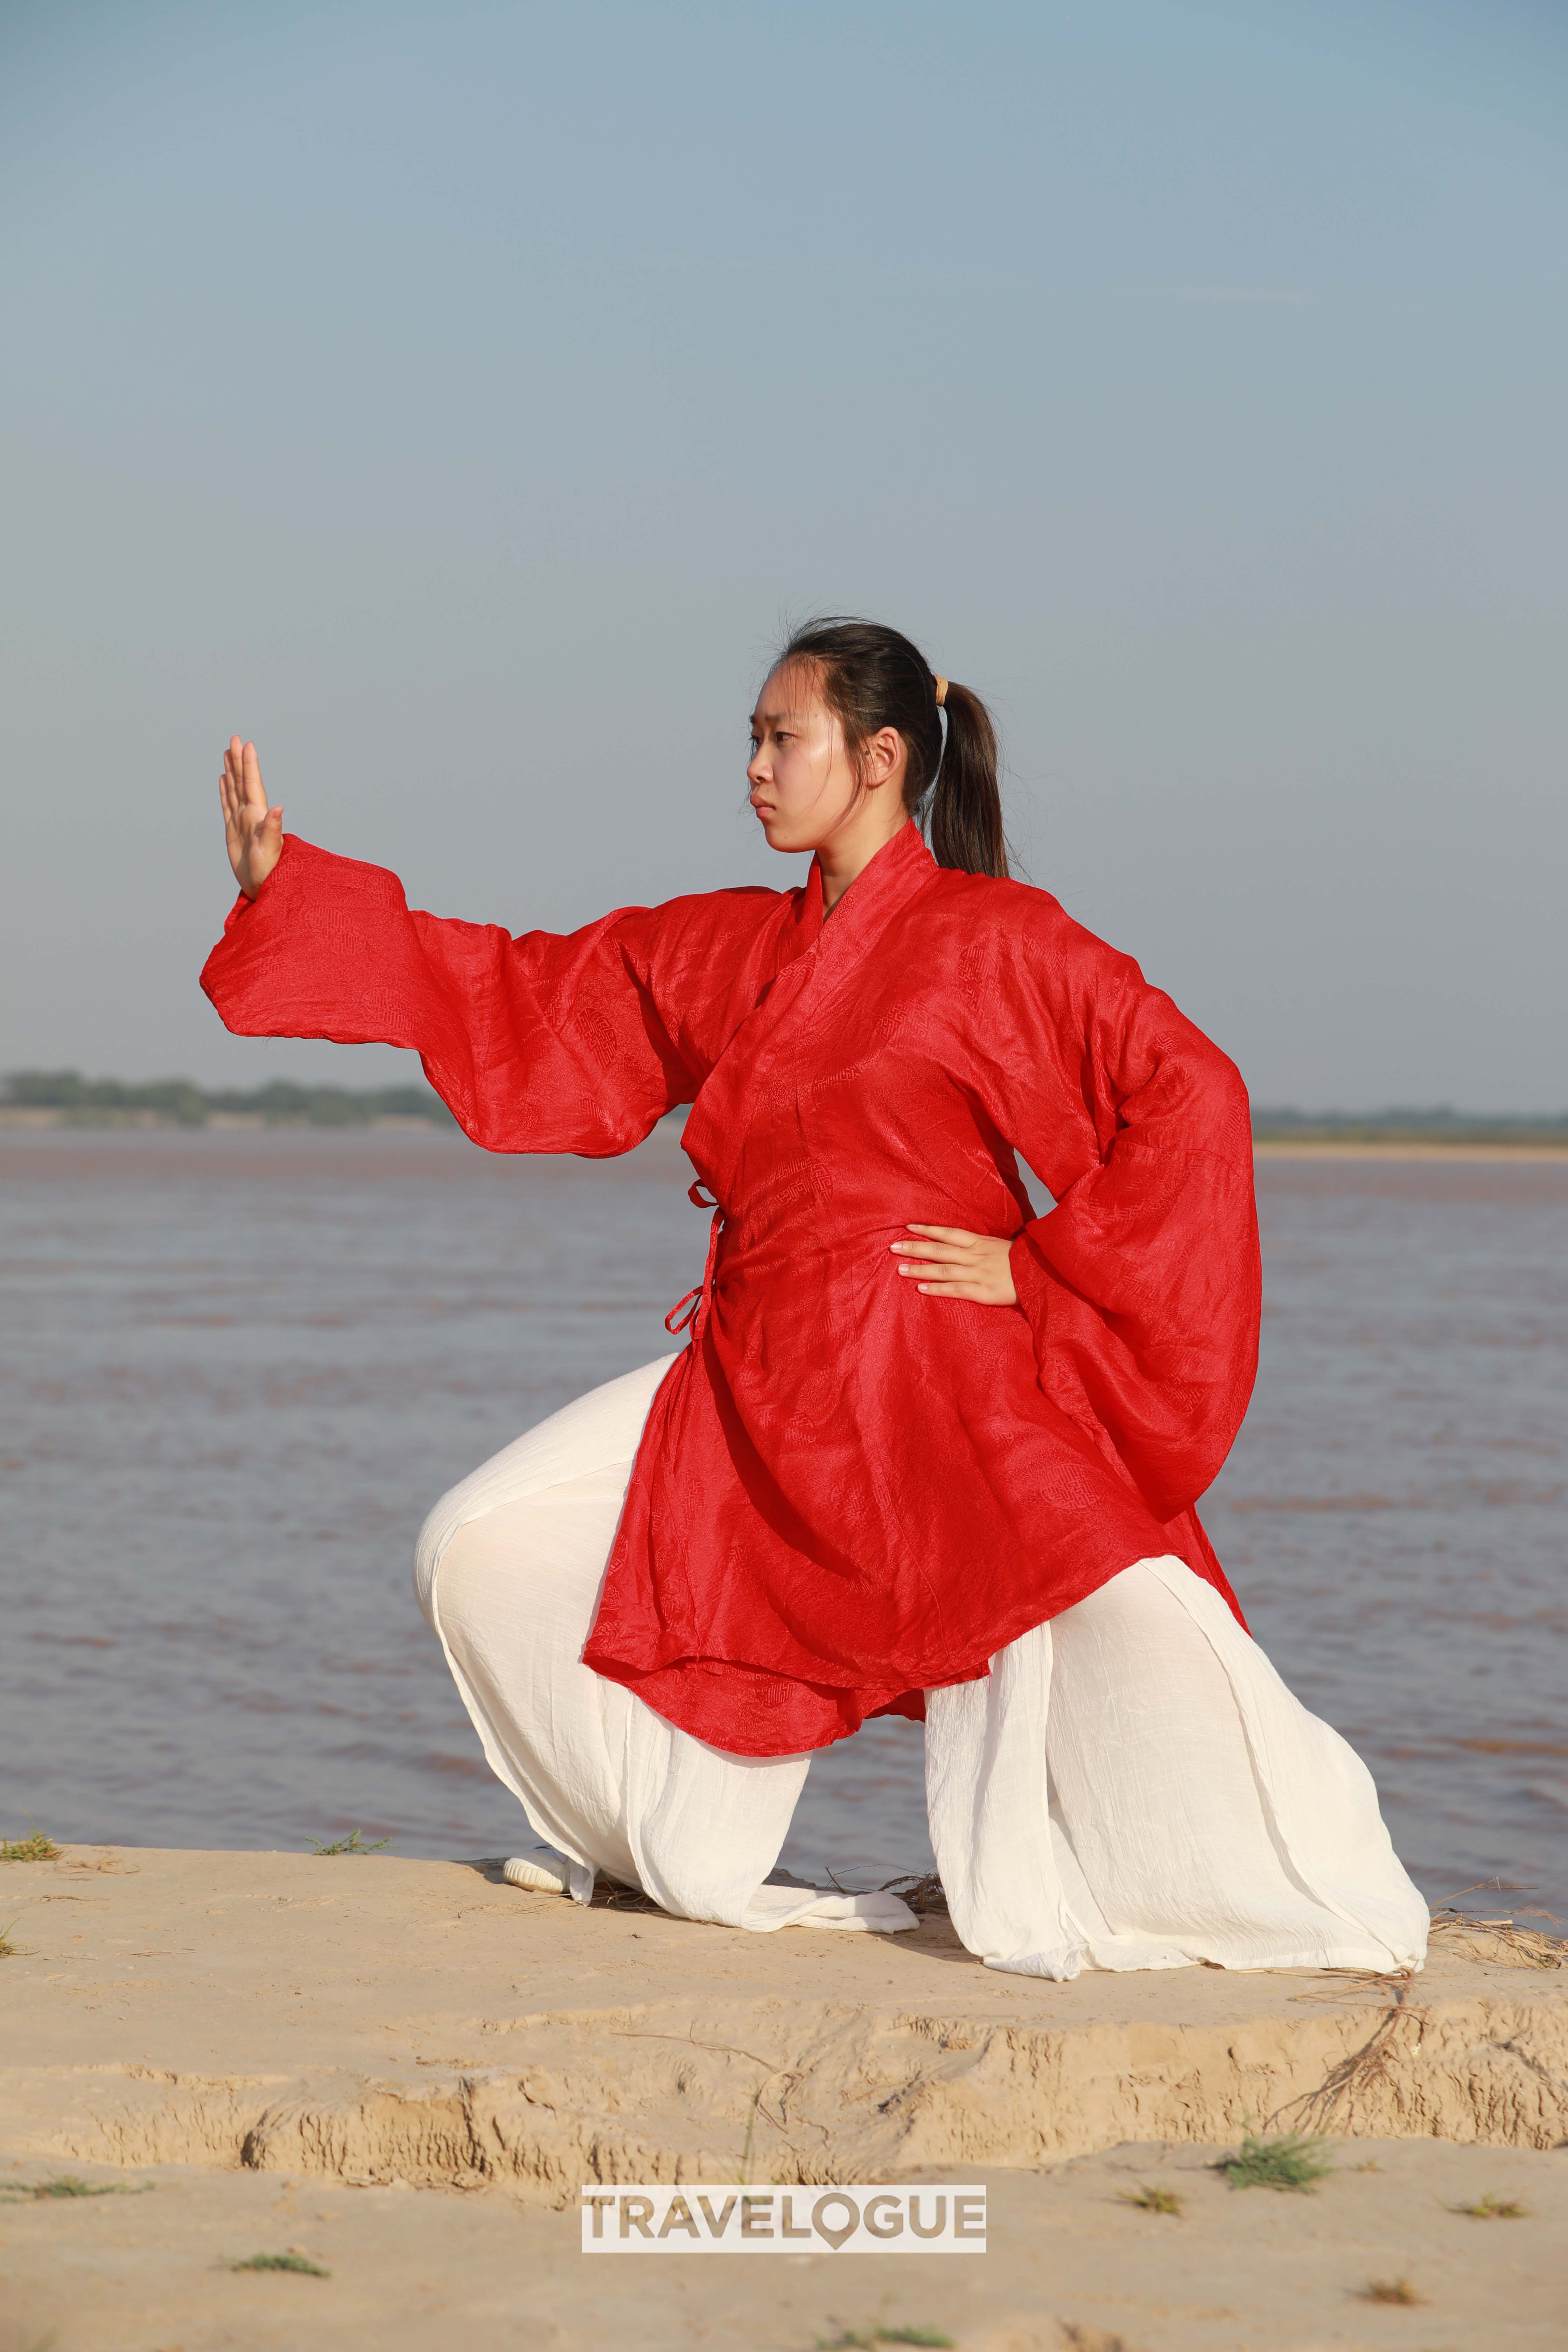 A woman practices Tai Chi in Chenjiagou, central China's Henan Province. /CGTN 